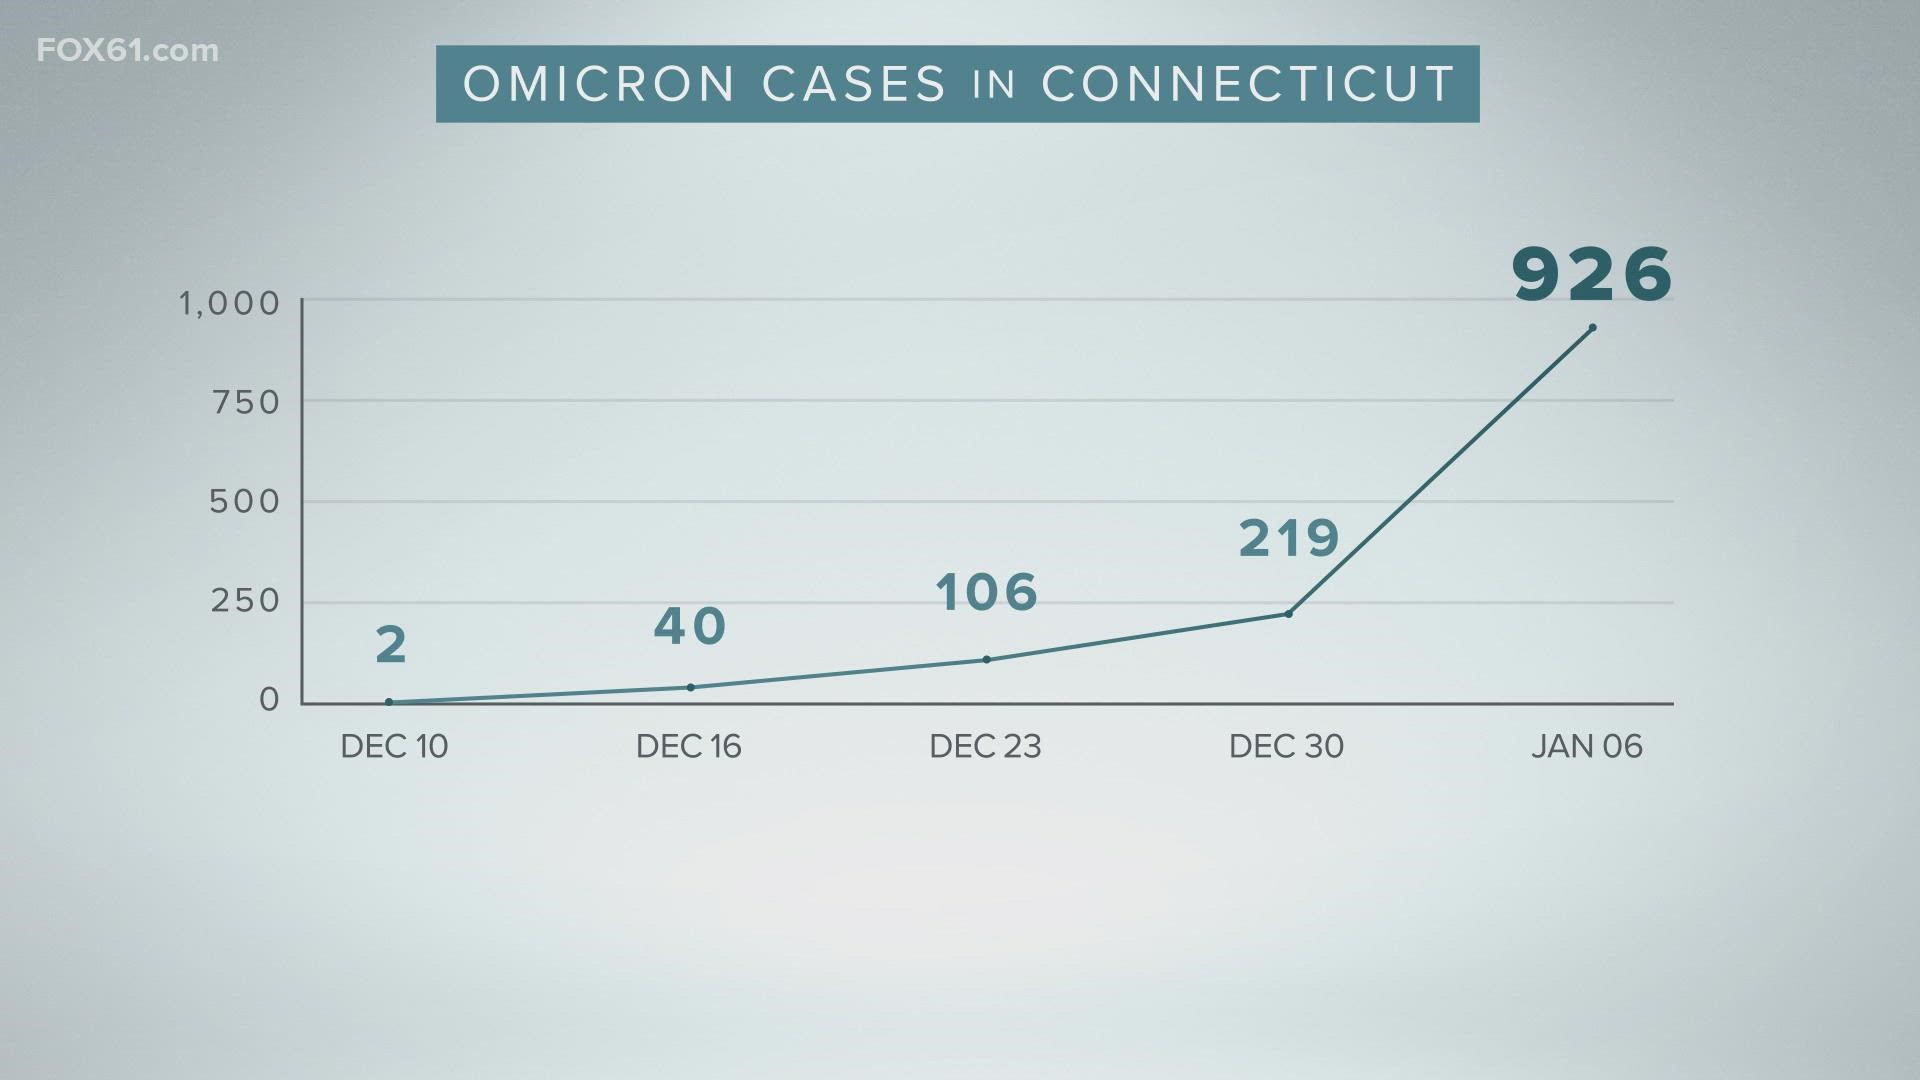 The number of confirmed omicron cases in Connecticut skyrocketed in the new year.